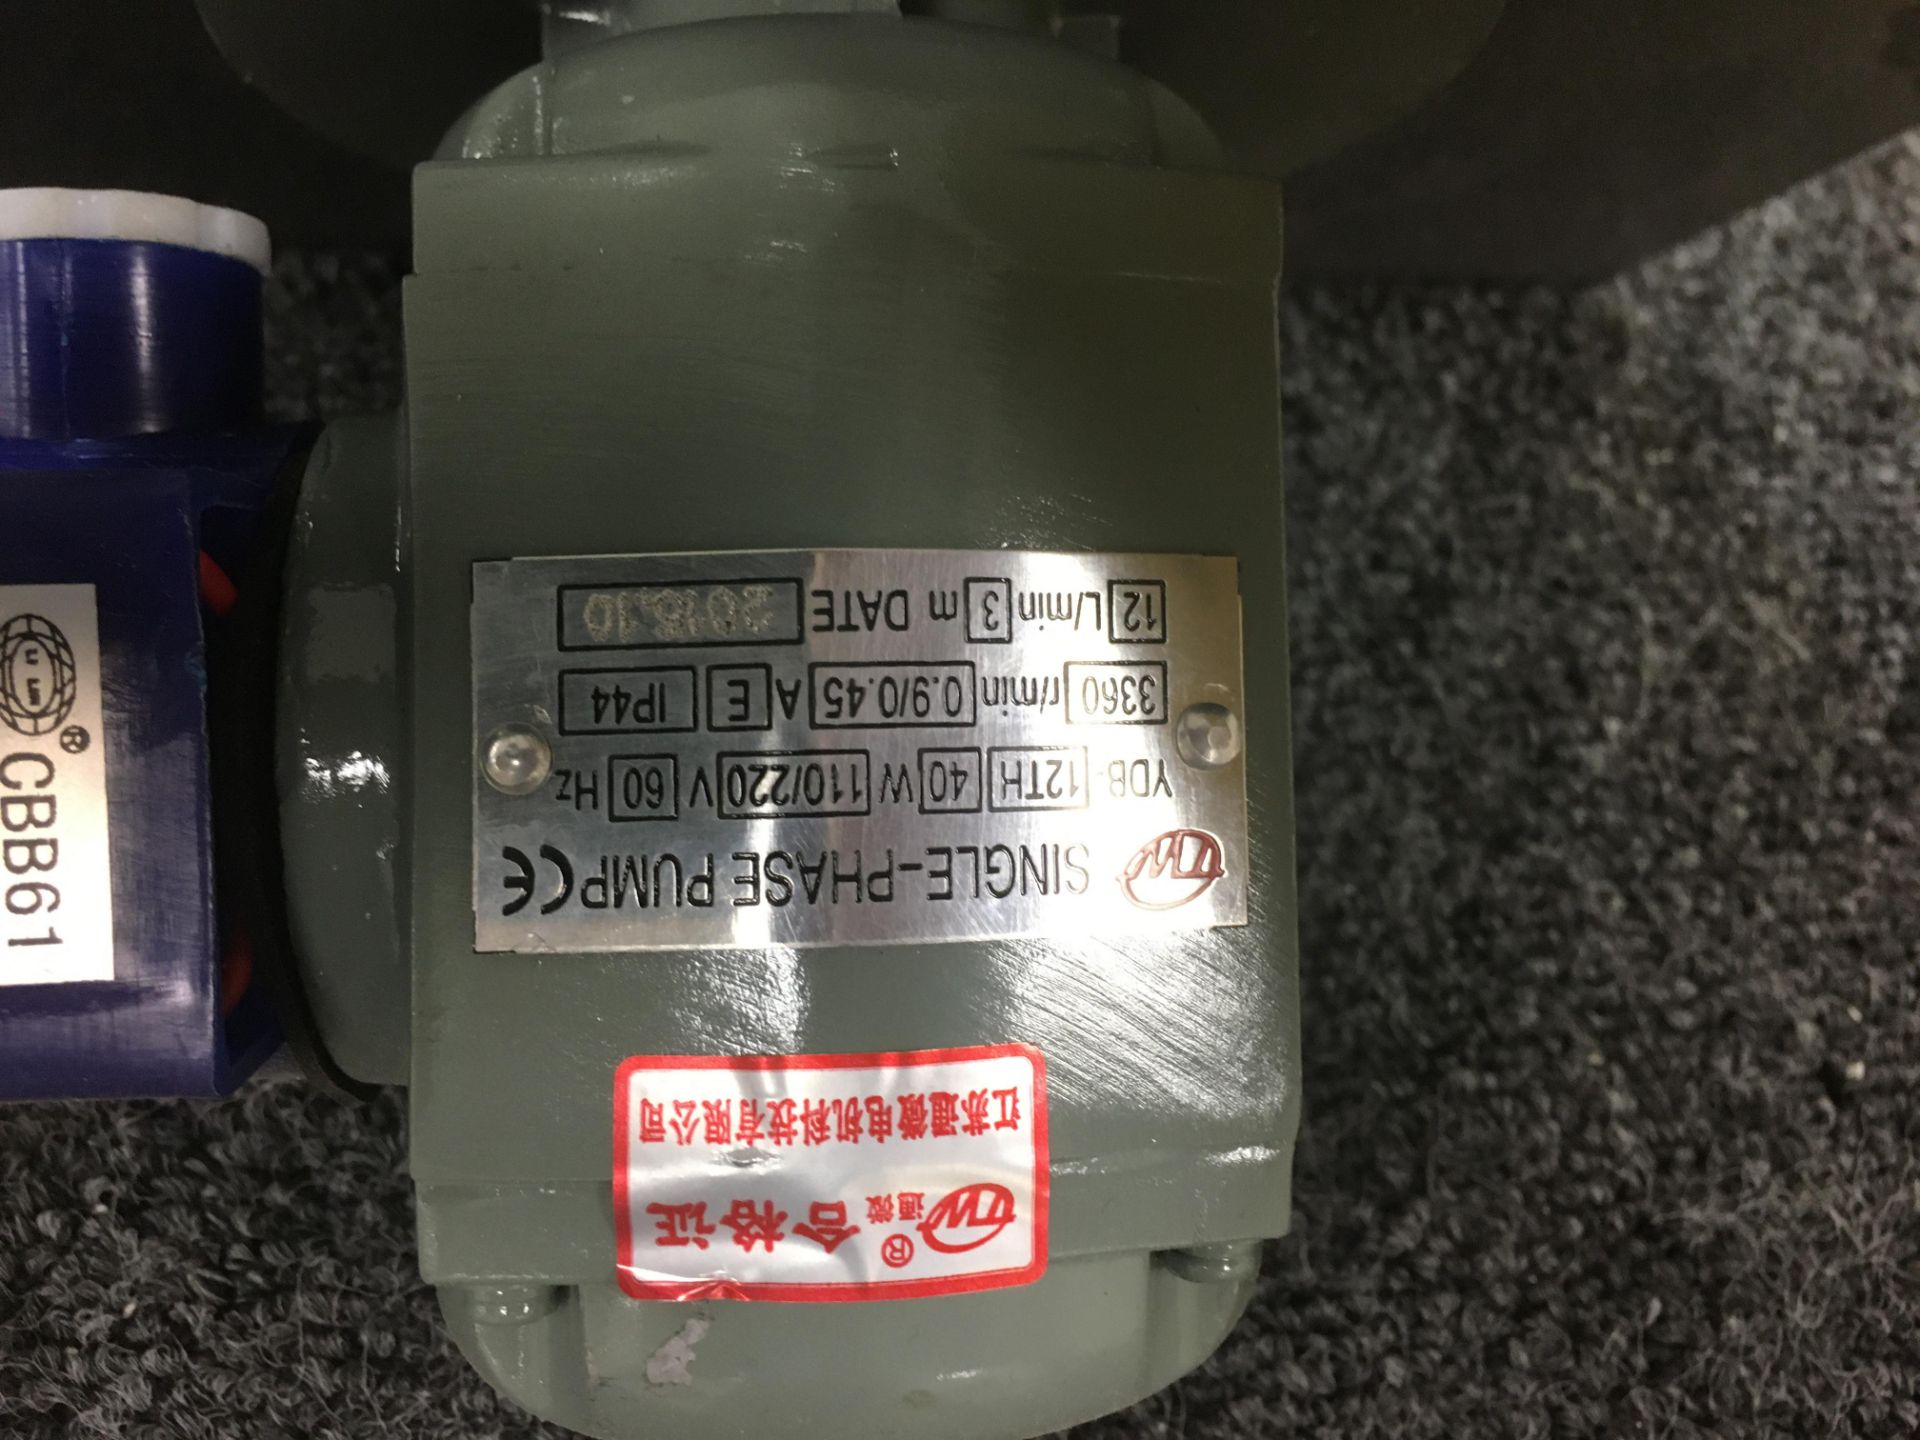 Single Phase Pump with 450 Volts Rigging Fee: $25 - Image 2 of 2